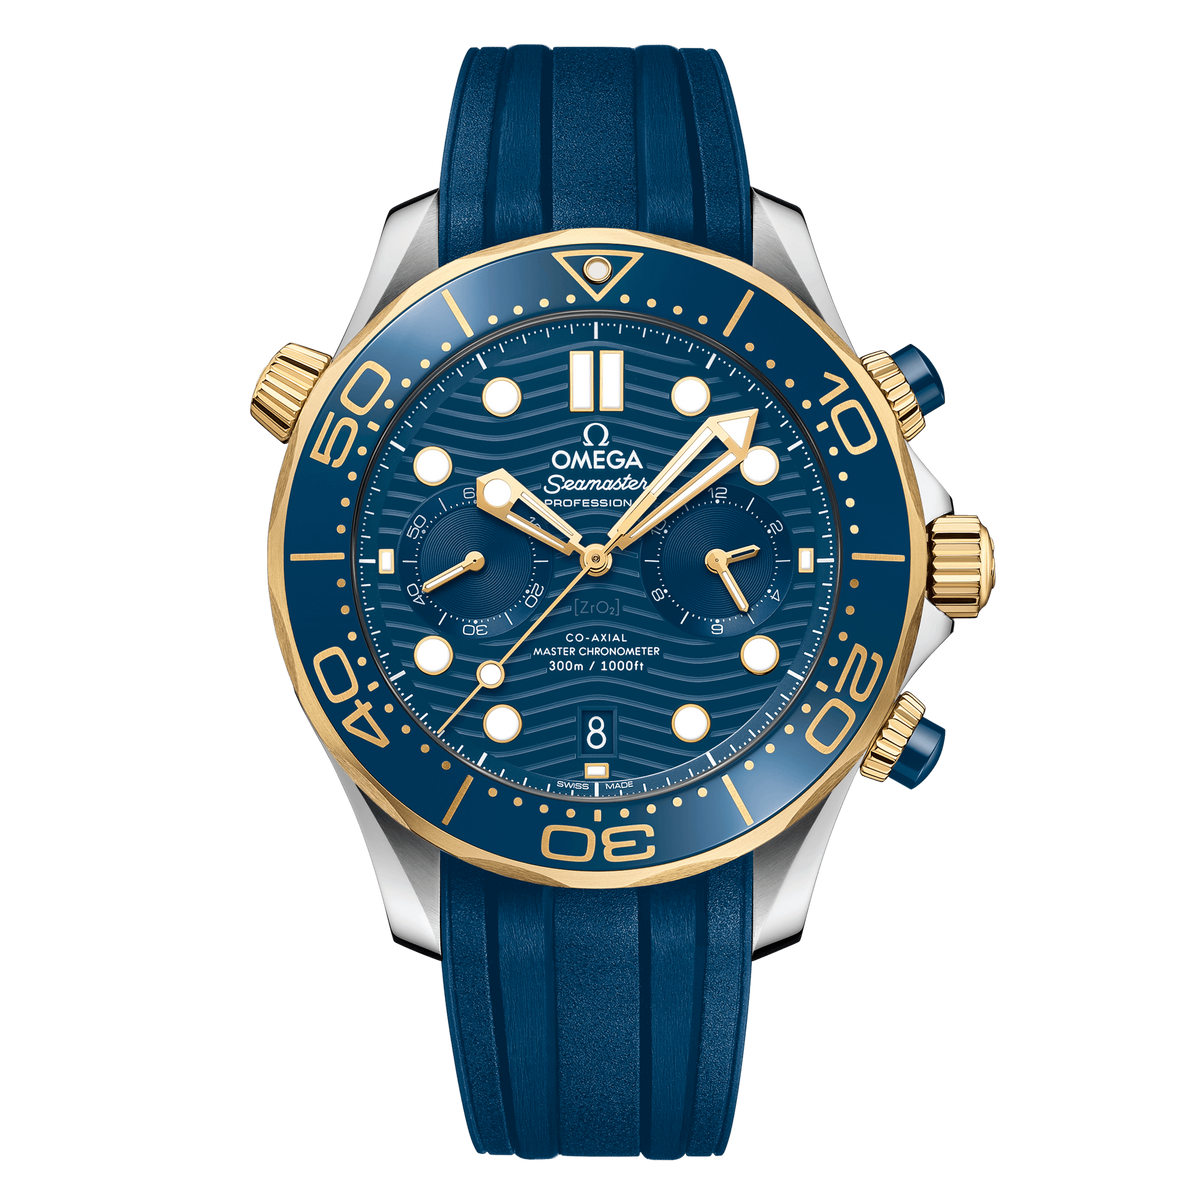 OMEGA Seamaster Diver 300m Co-Axial Master Chronometer Chronograph 44mm,  Blue and Gold